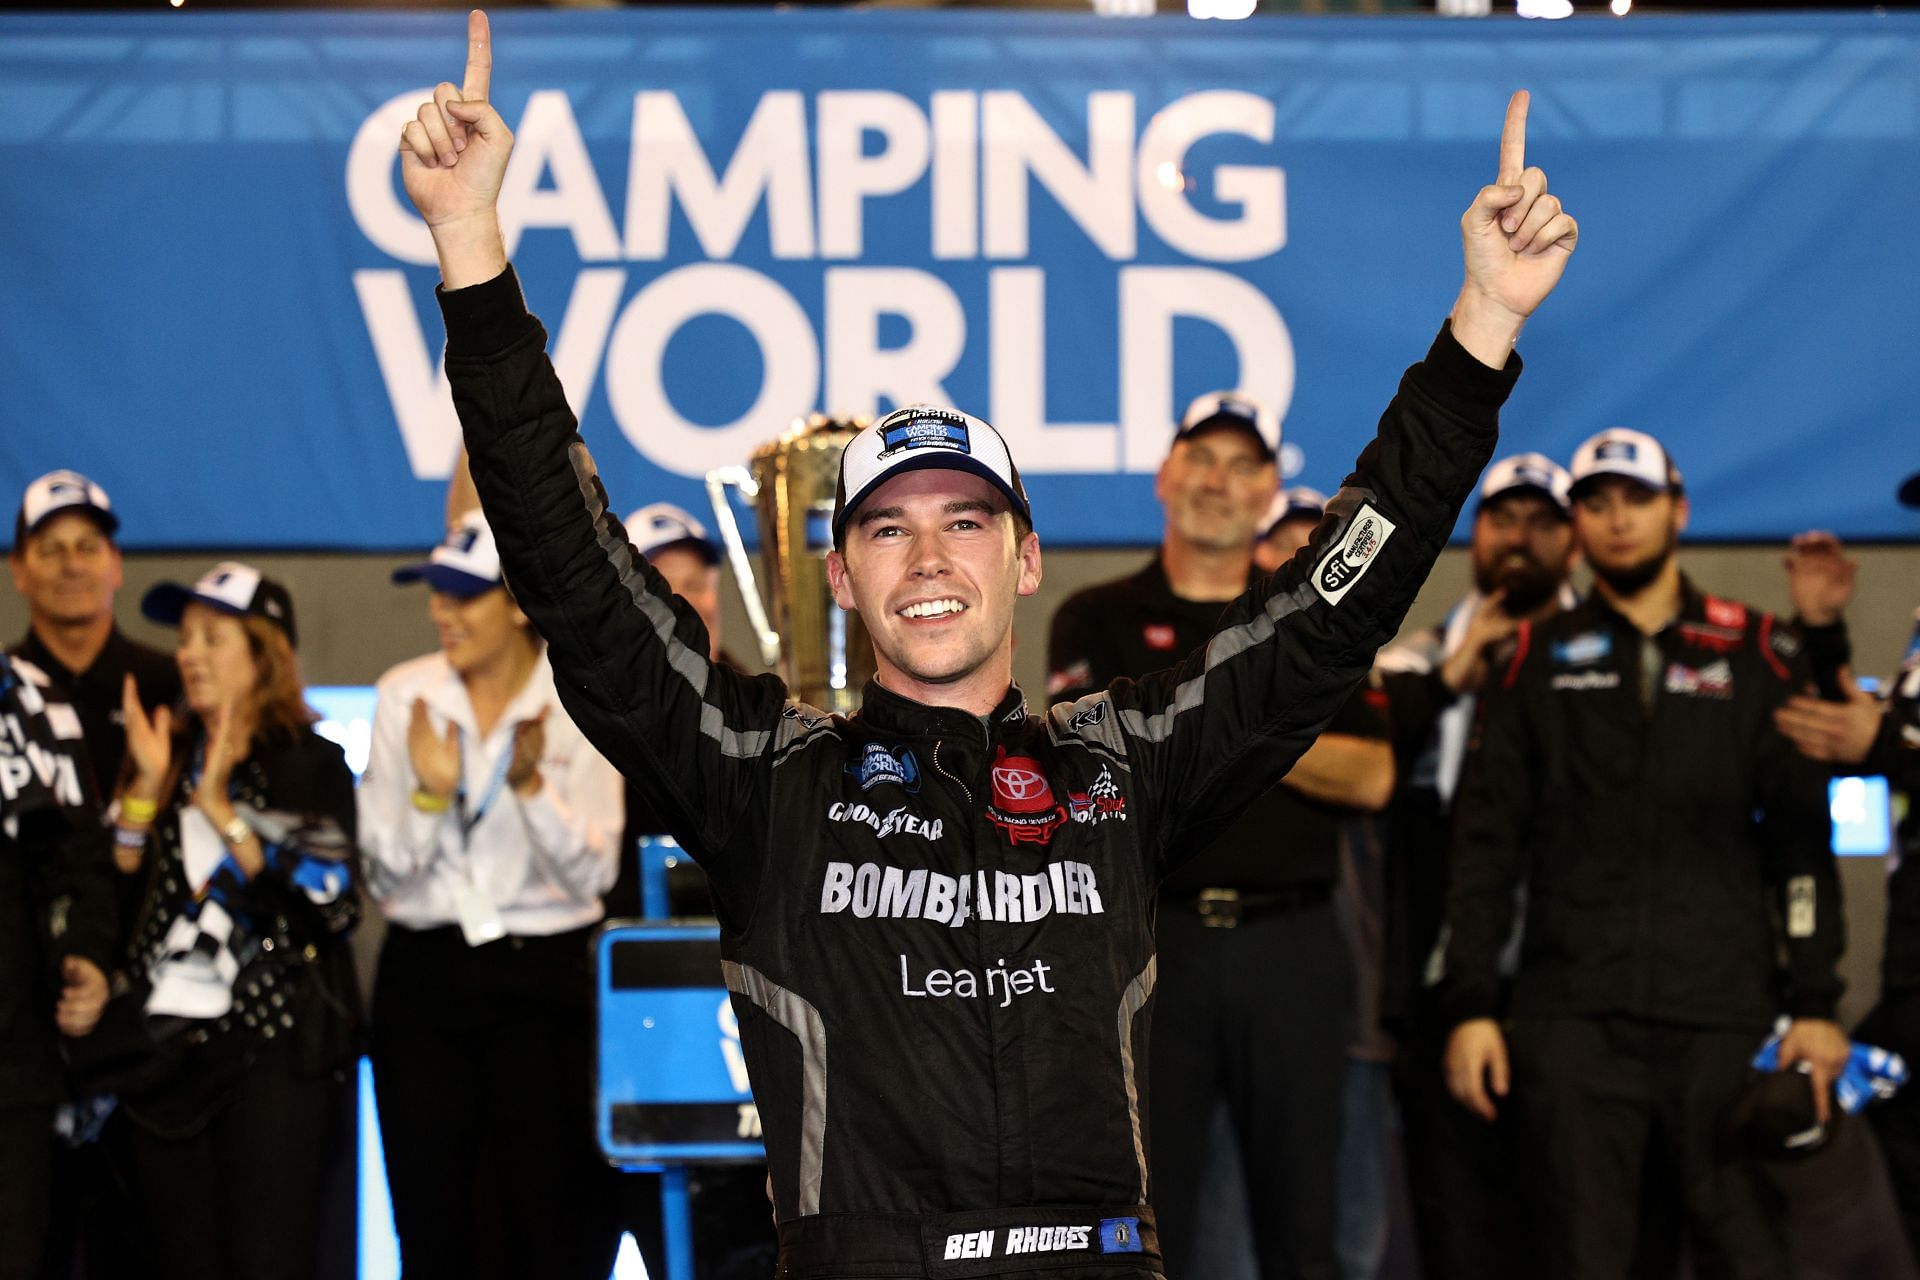 Ben Rhodes celebrates in victory lane after winning the 2021 NASCAR Camping World Truck Series Championship at Phoenix Raceway on November 05, 2021 in Avondale, Arizona. (Photo by Chris Graythen/Getty Images)